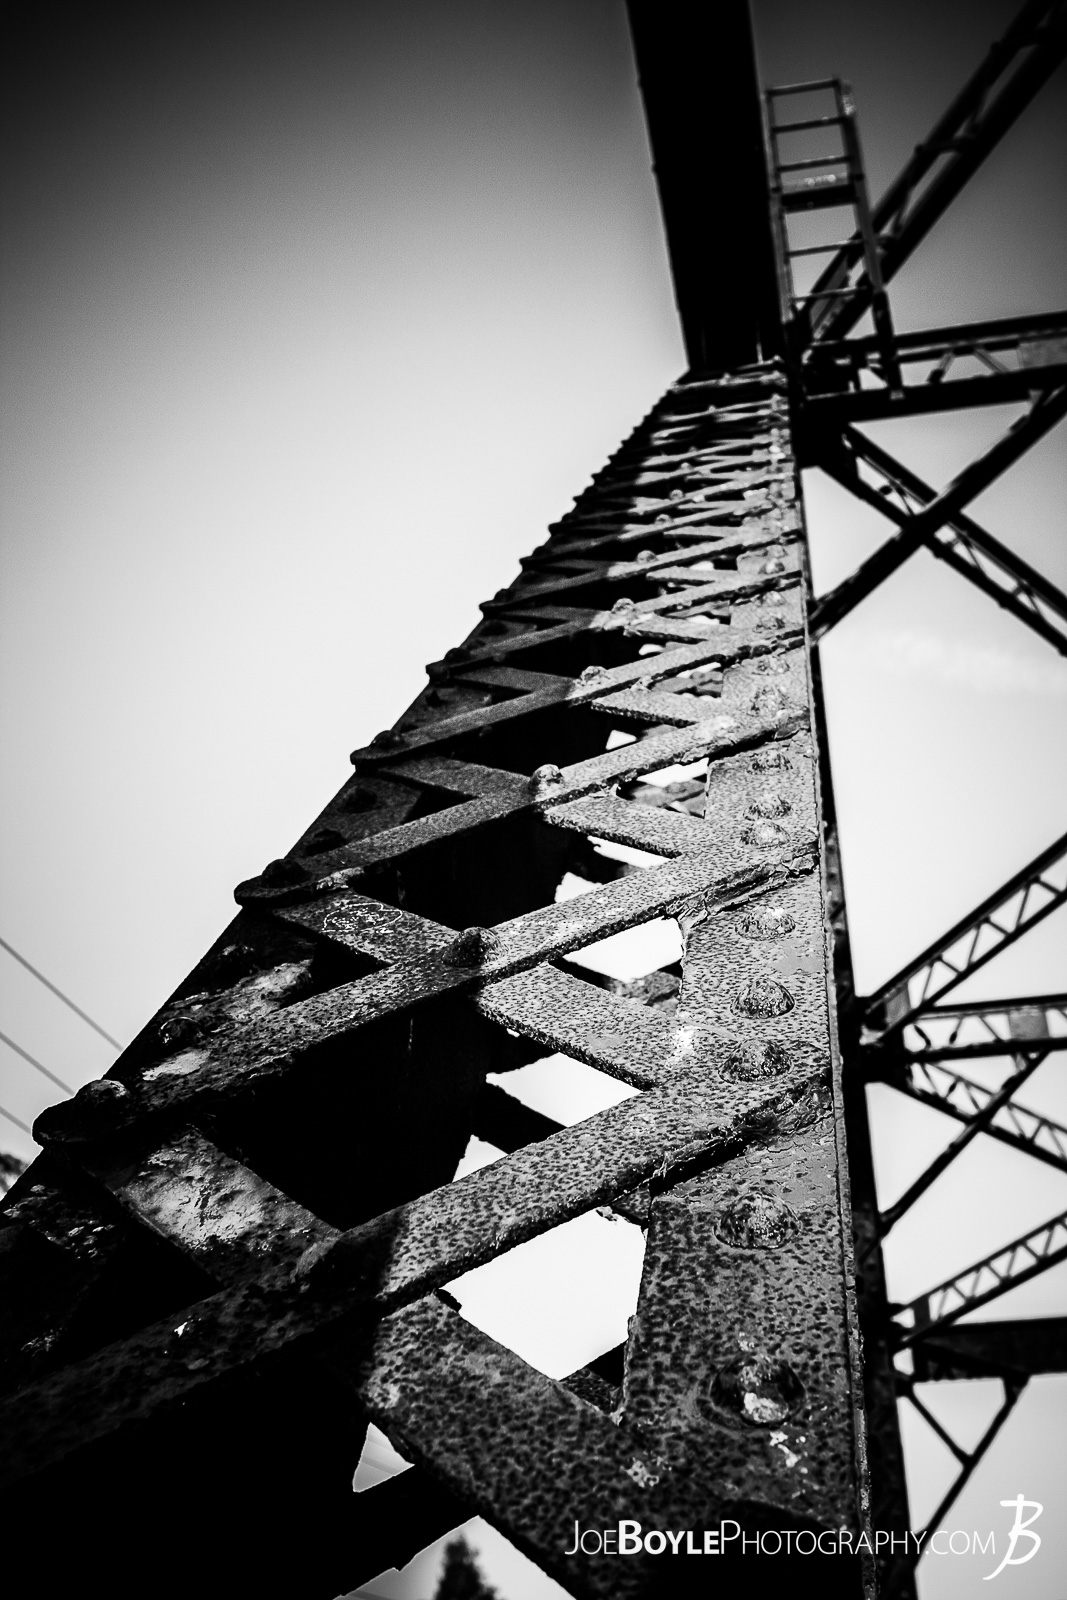  I visited the Beach and Boardwalk at Santa Cruz, California and this really cool looking bridge was nearby. I don't think it was in use anymore. Here is a black and white photo of the bridge pylon. 